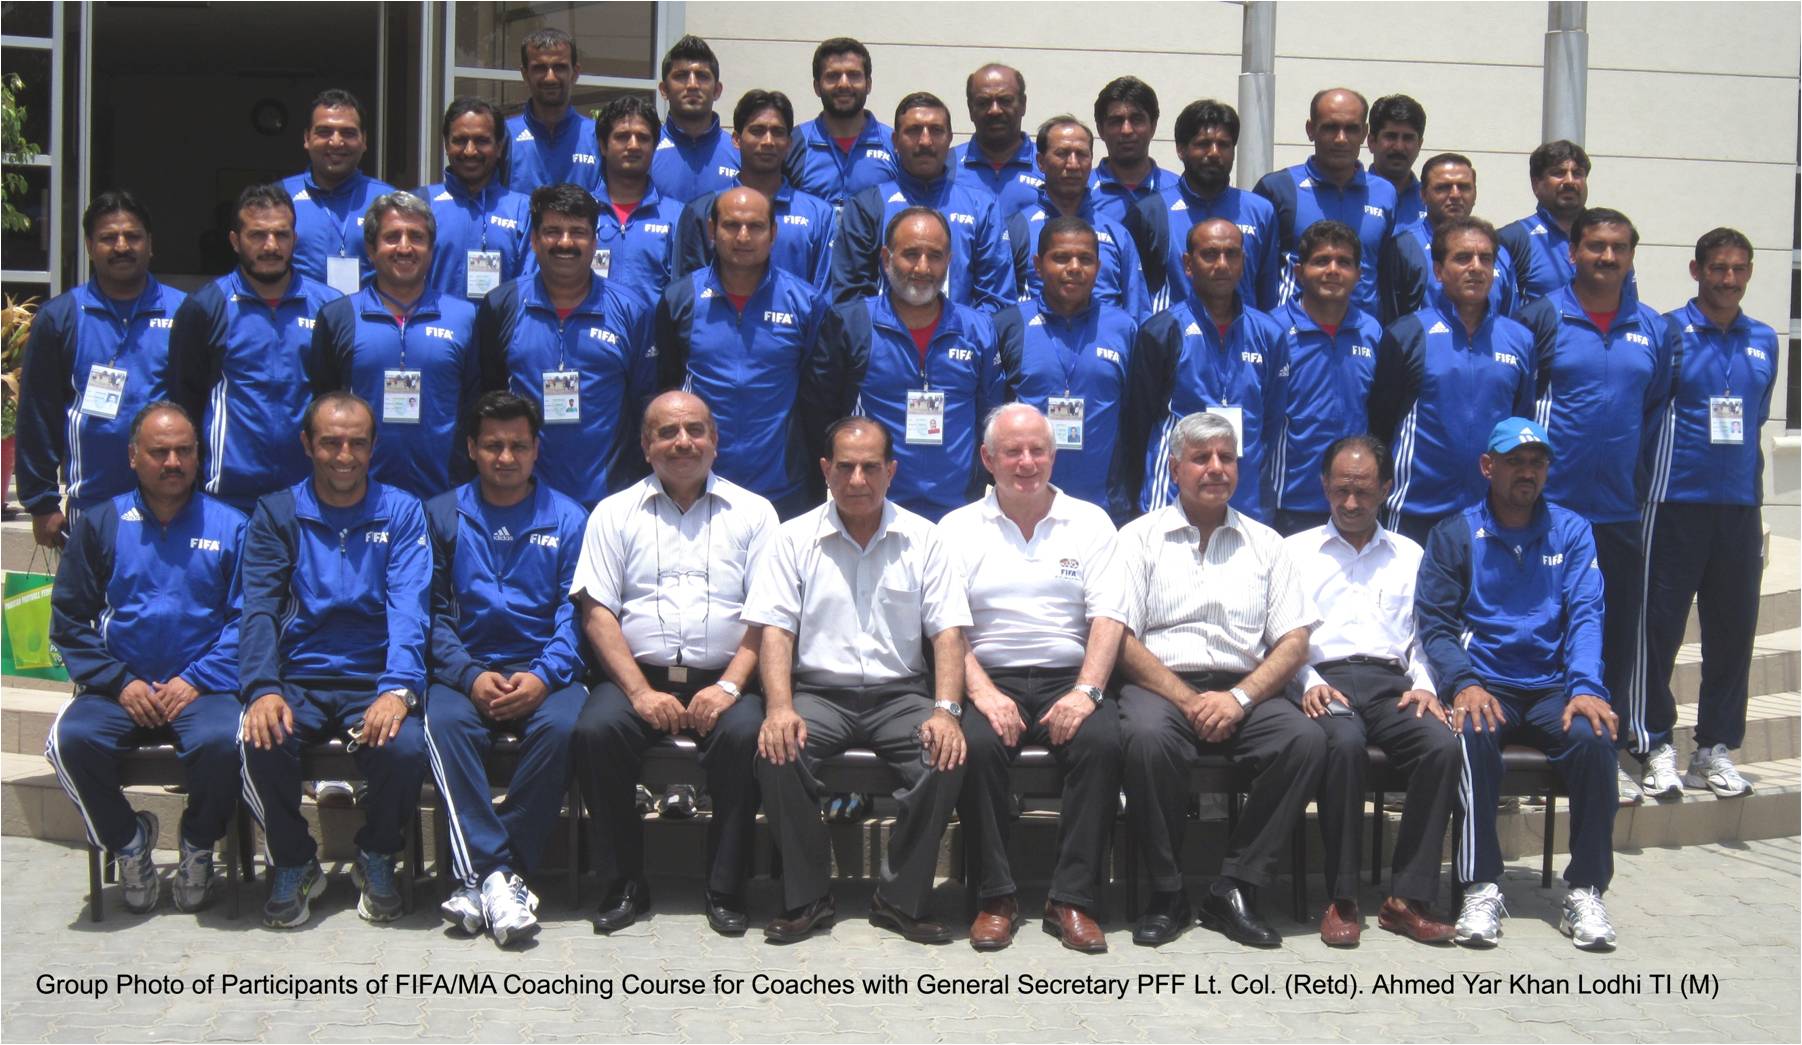 FIFA MA Coaching Course has concluded